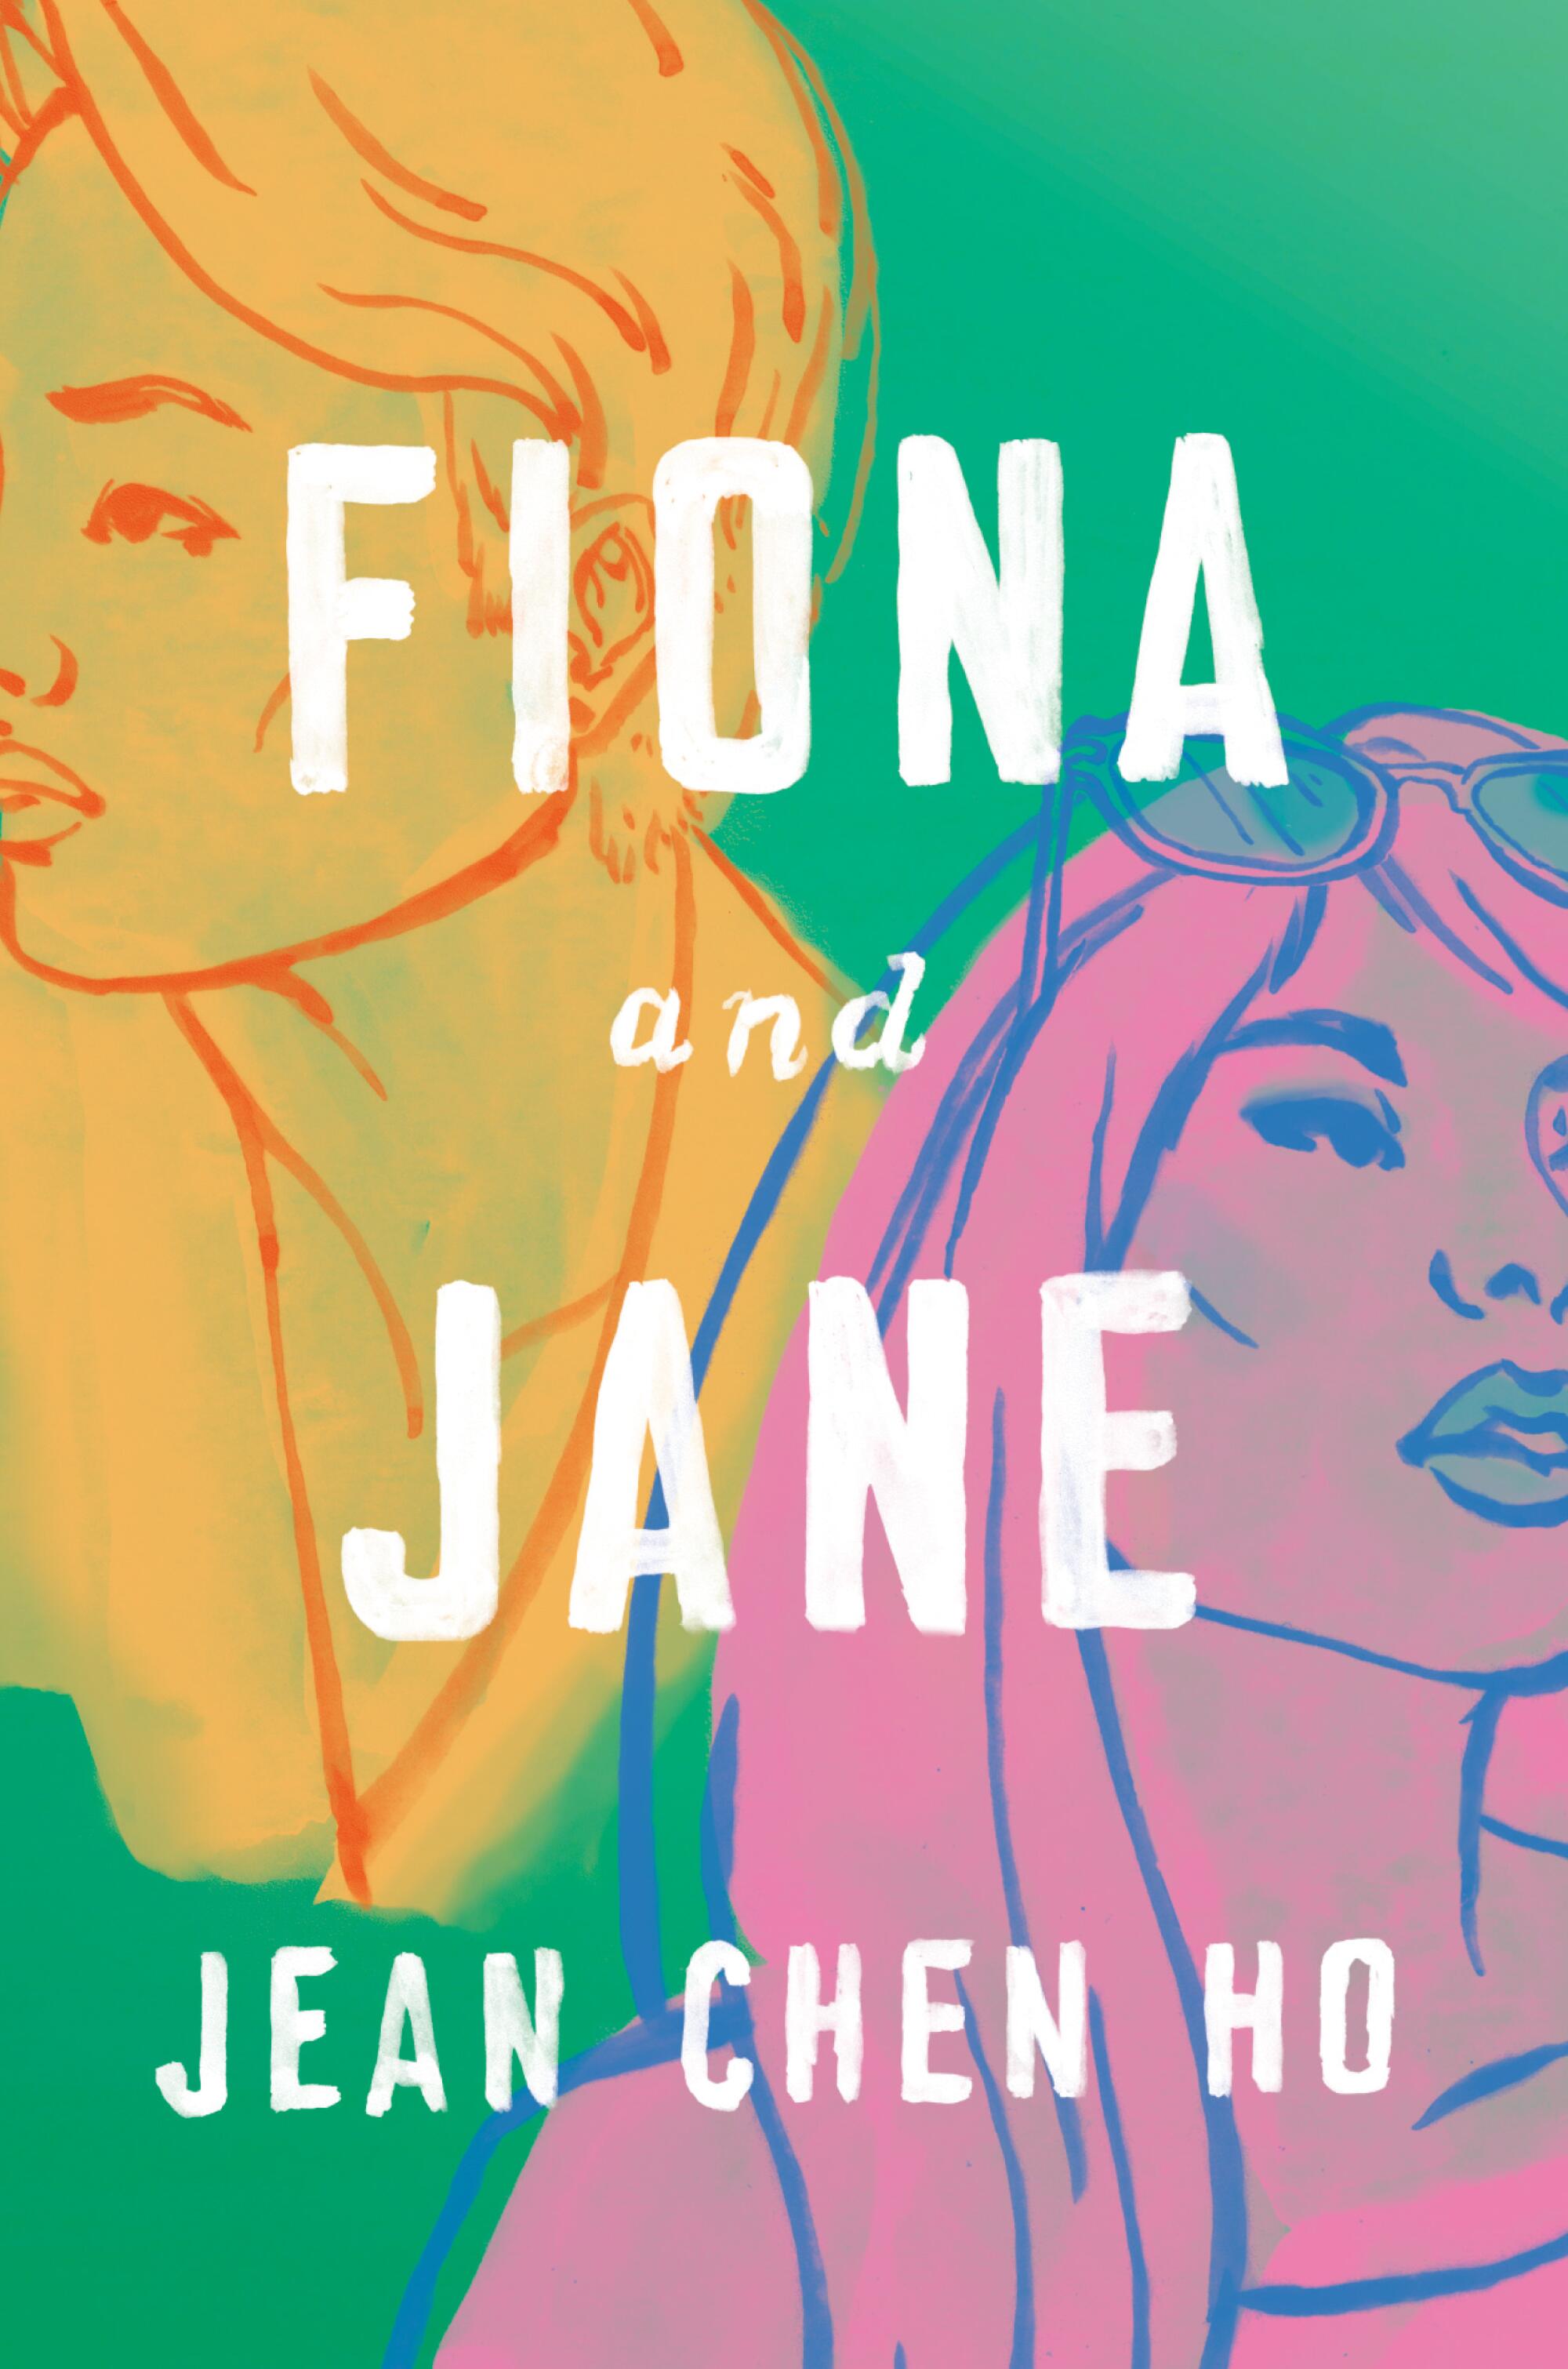 yellow, green and pink illustration of two women on cover of "Fiona and Jane," by Jean Chen Ho